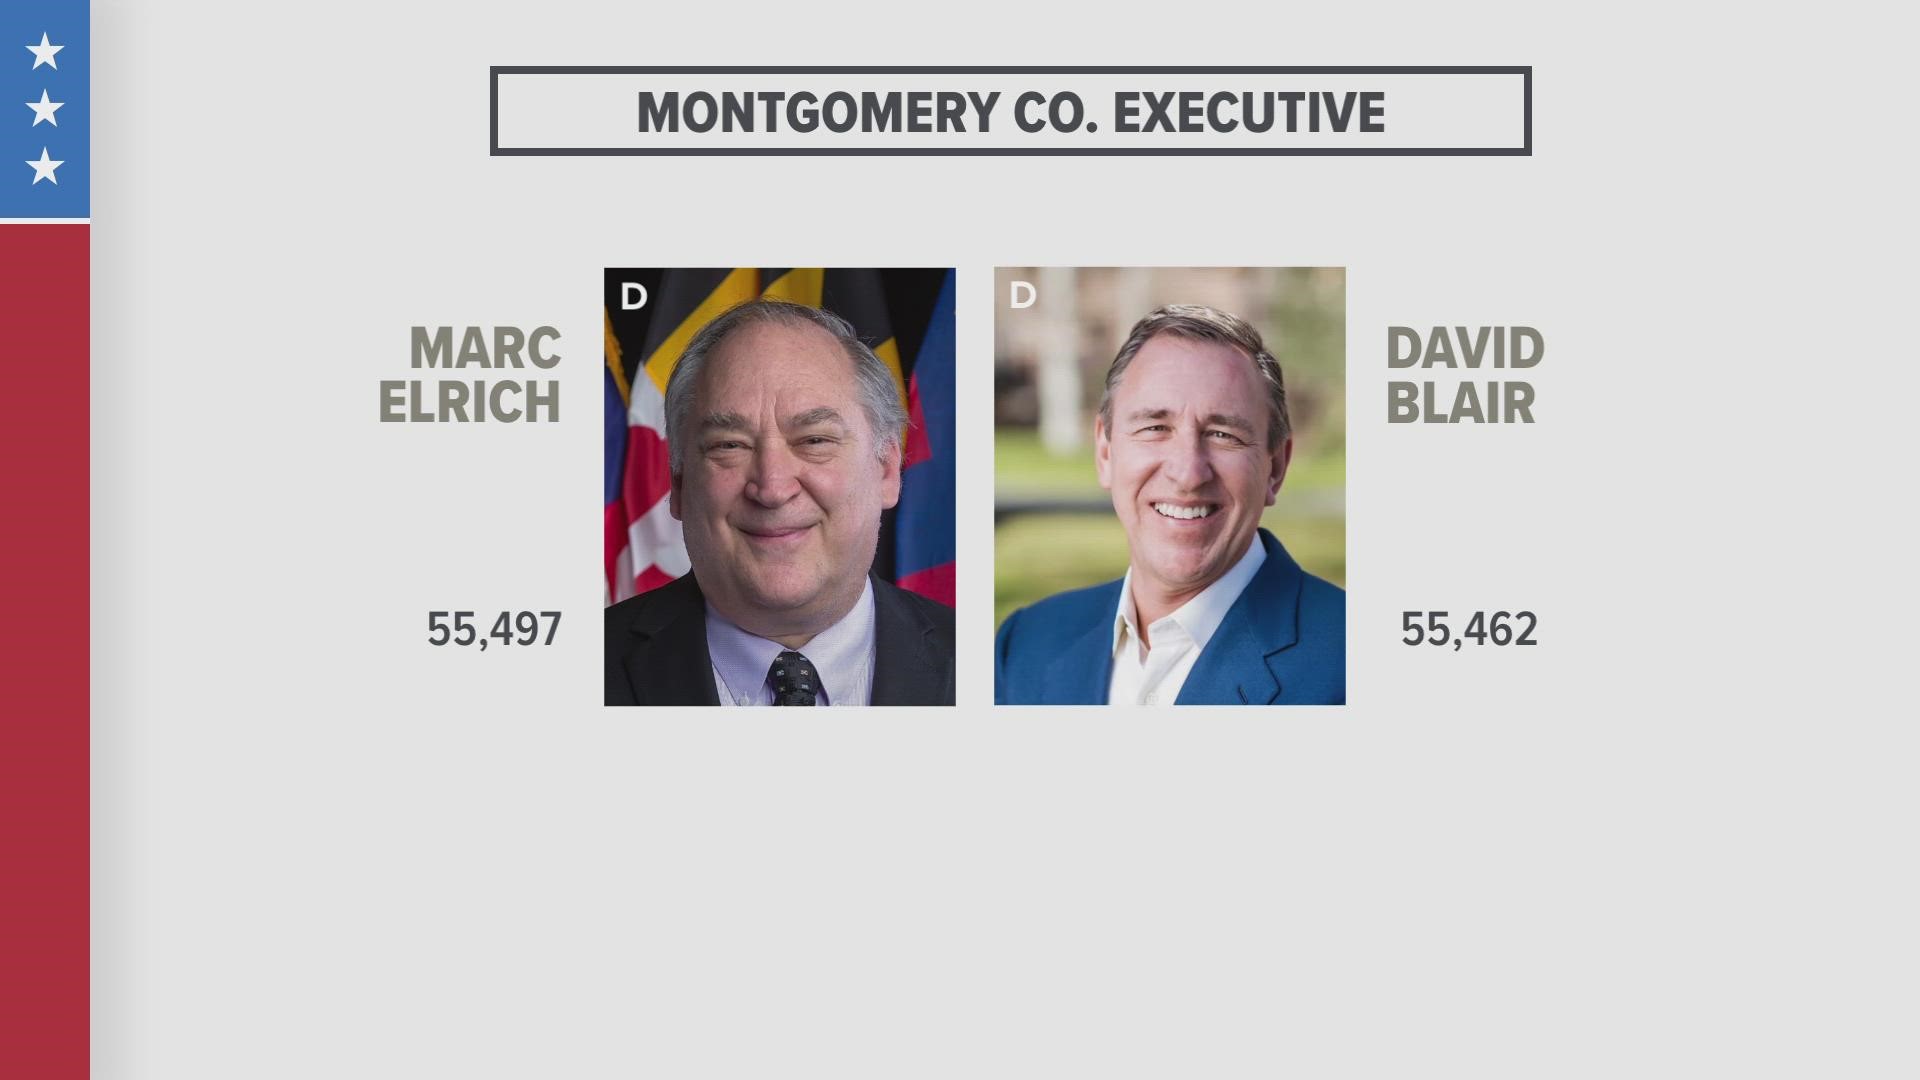 The Maryland State Board of Elections certified votes today. Incumbent Marc Elrich won by a whisper of 35 votes over David Blair as of certification.